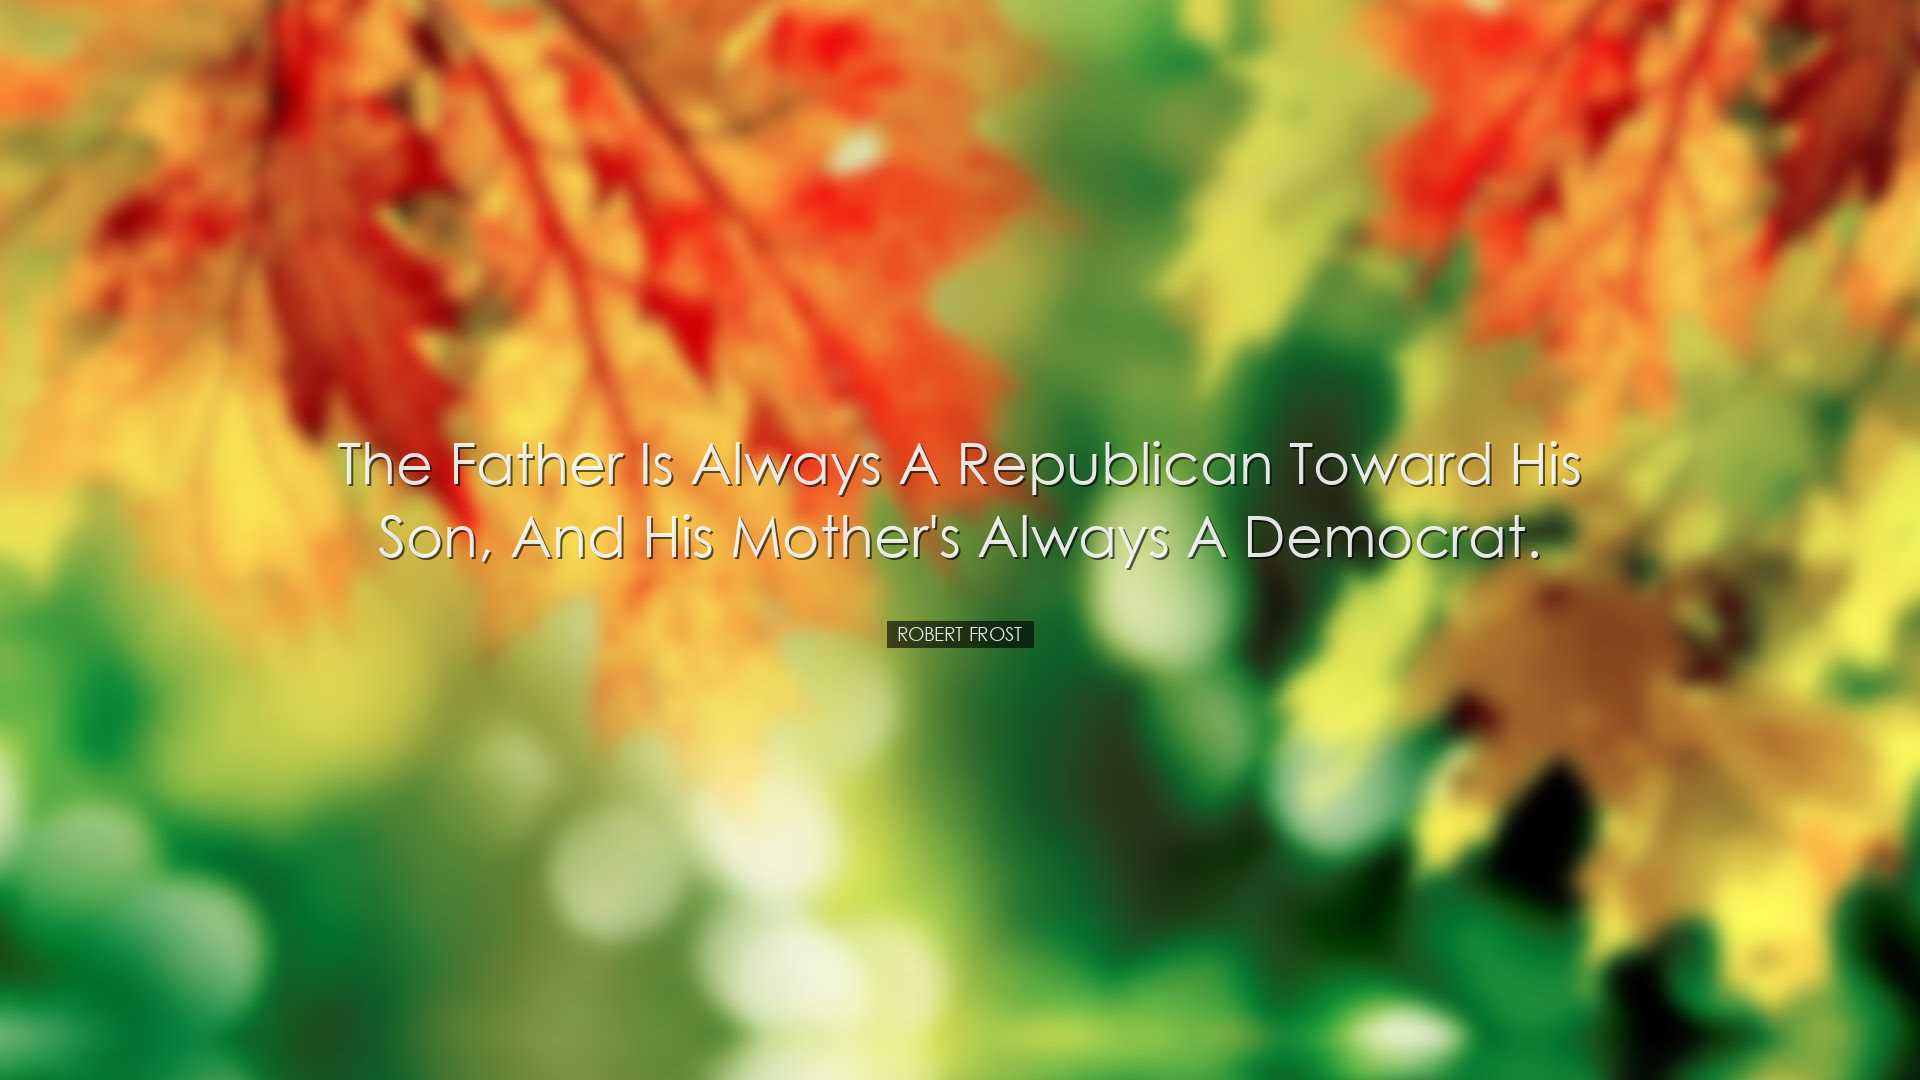 The father is always a Republican toward his son, and his mother's